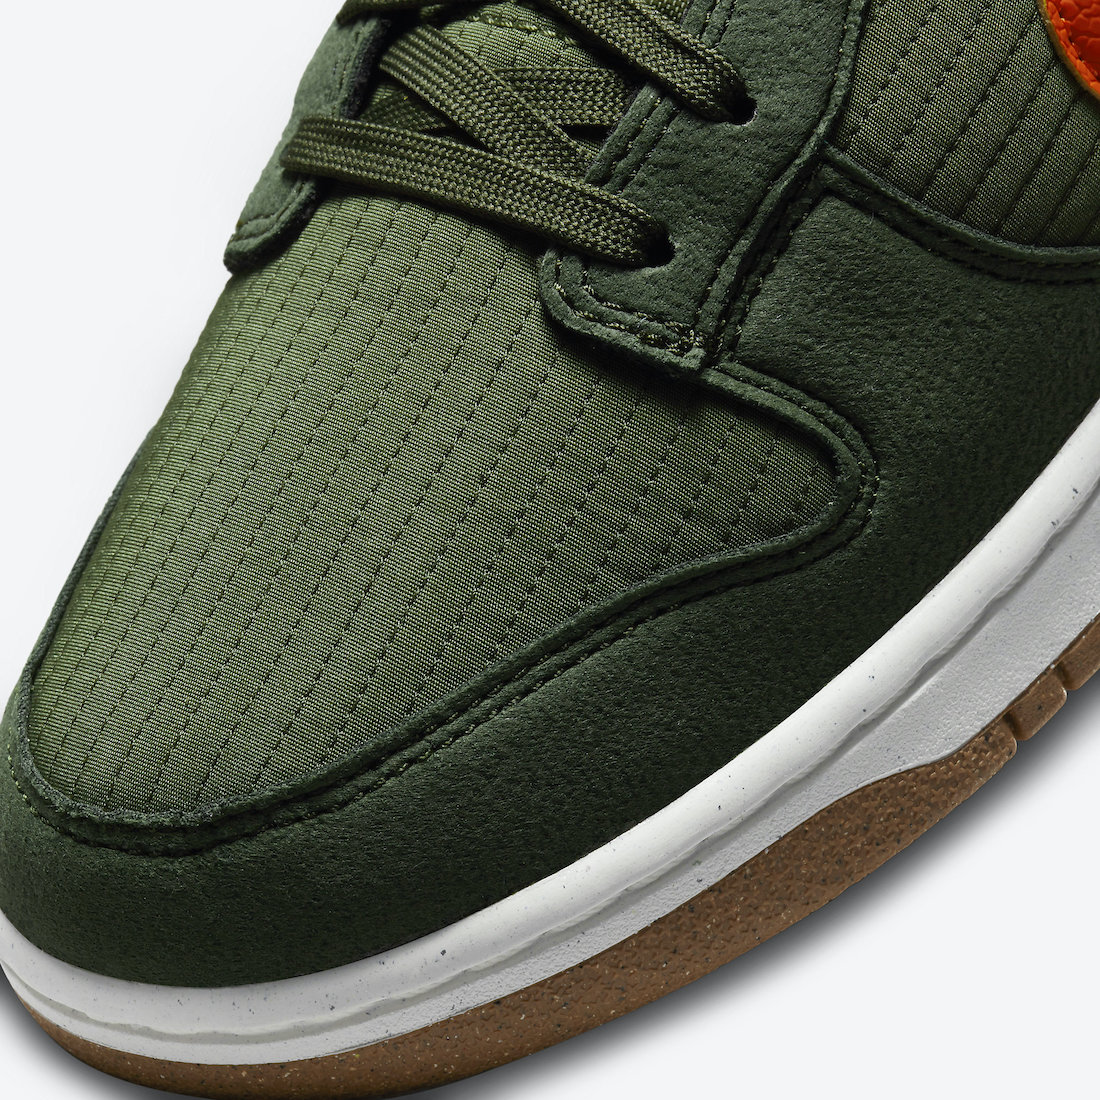 Nike-Dunk-Low-Toasty-Sequoia-DD3358-300-Release-Date-Price-6